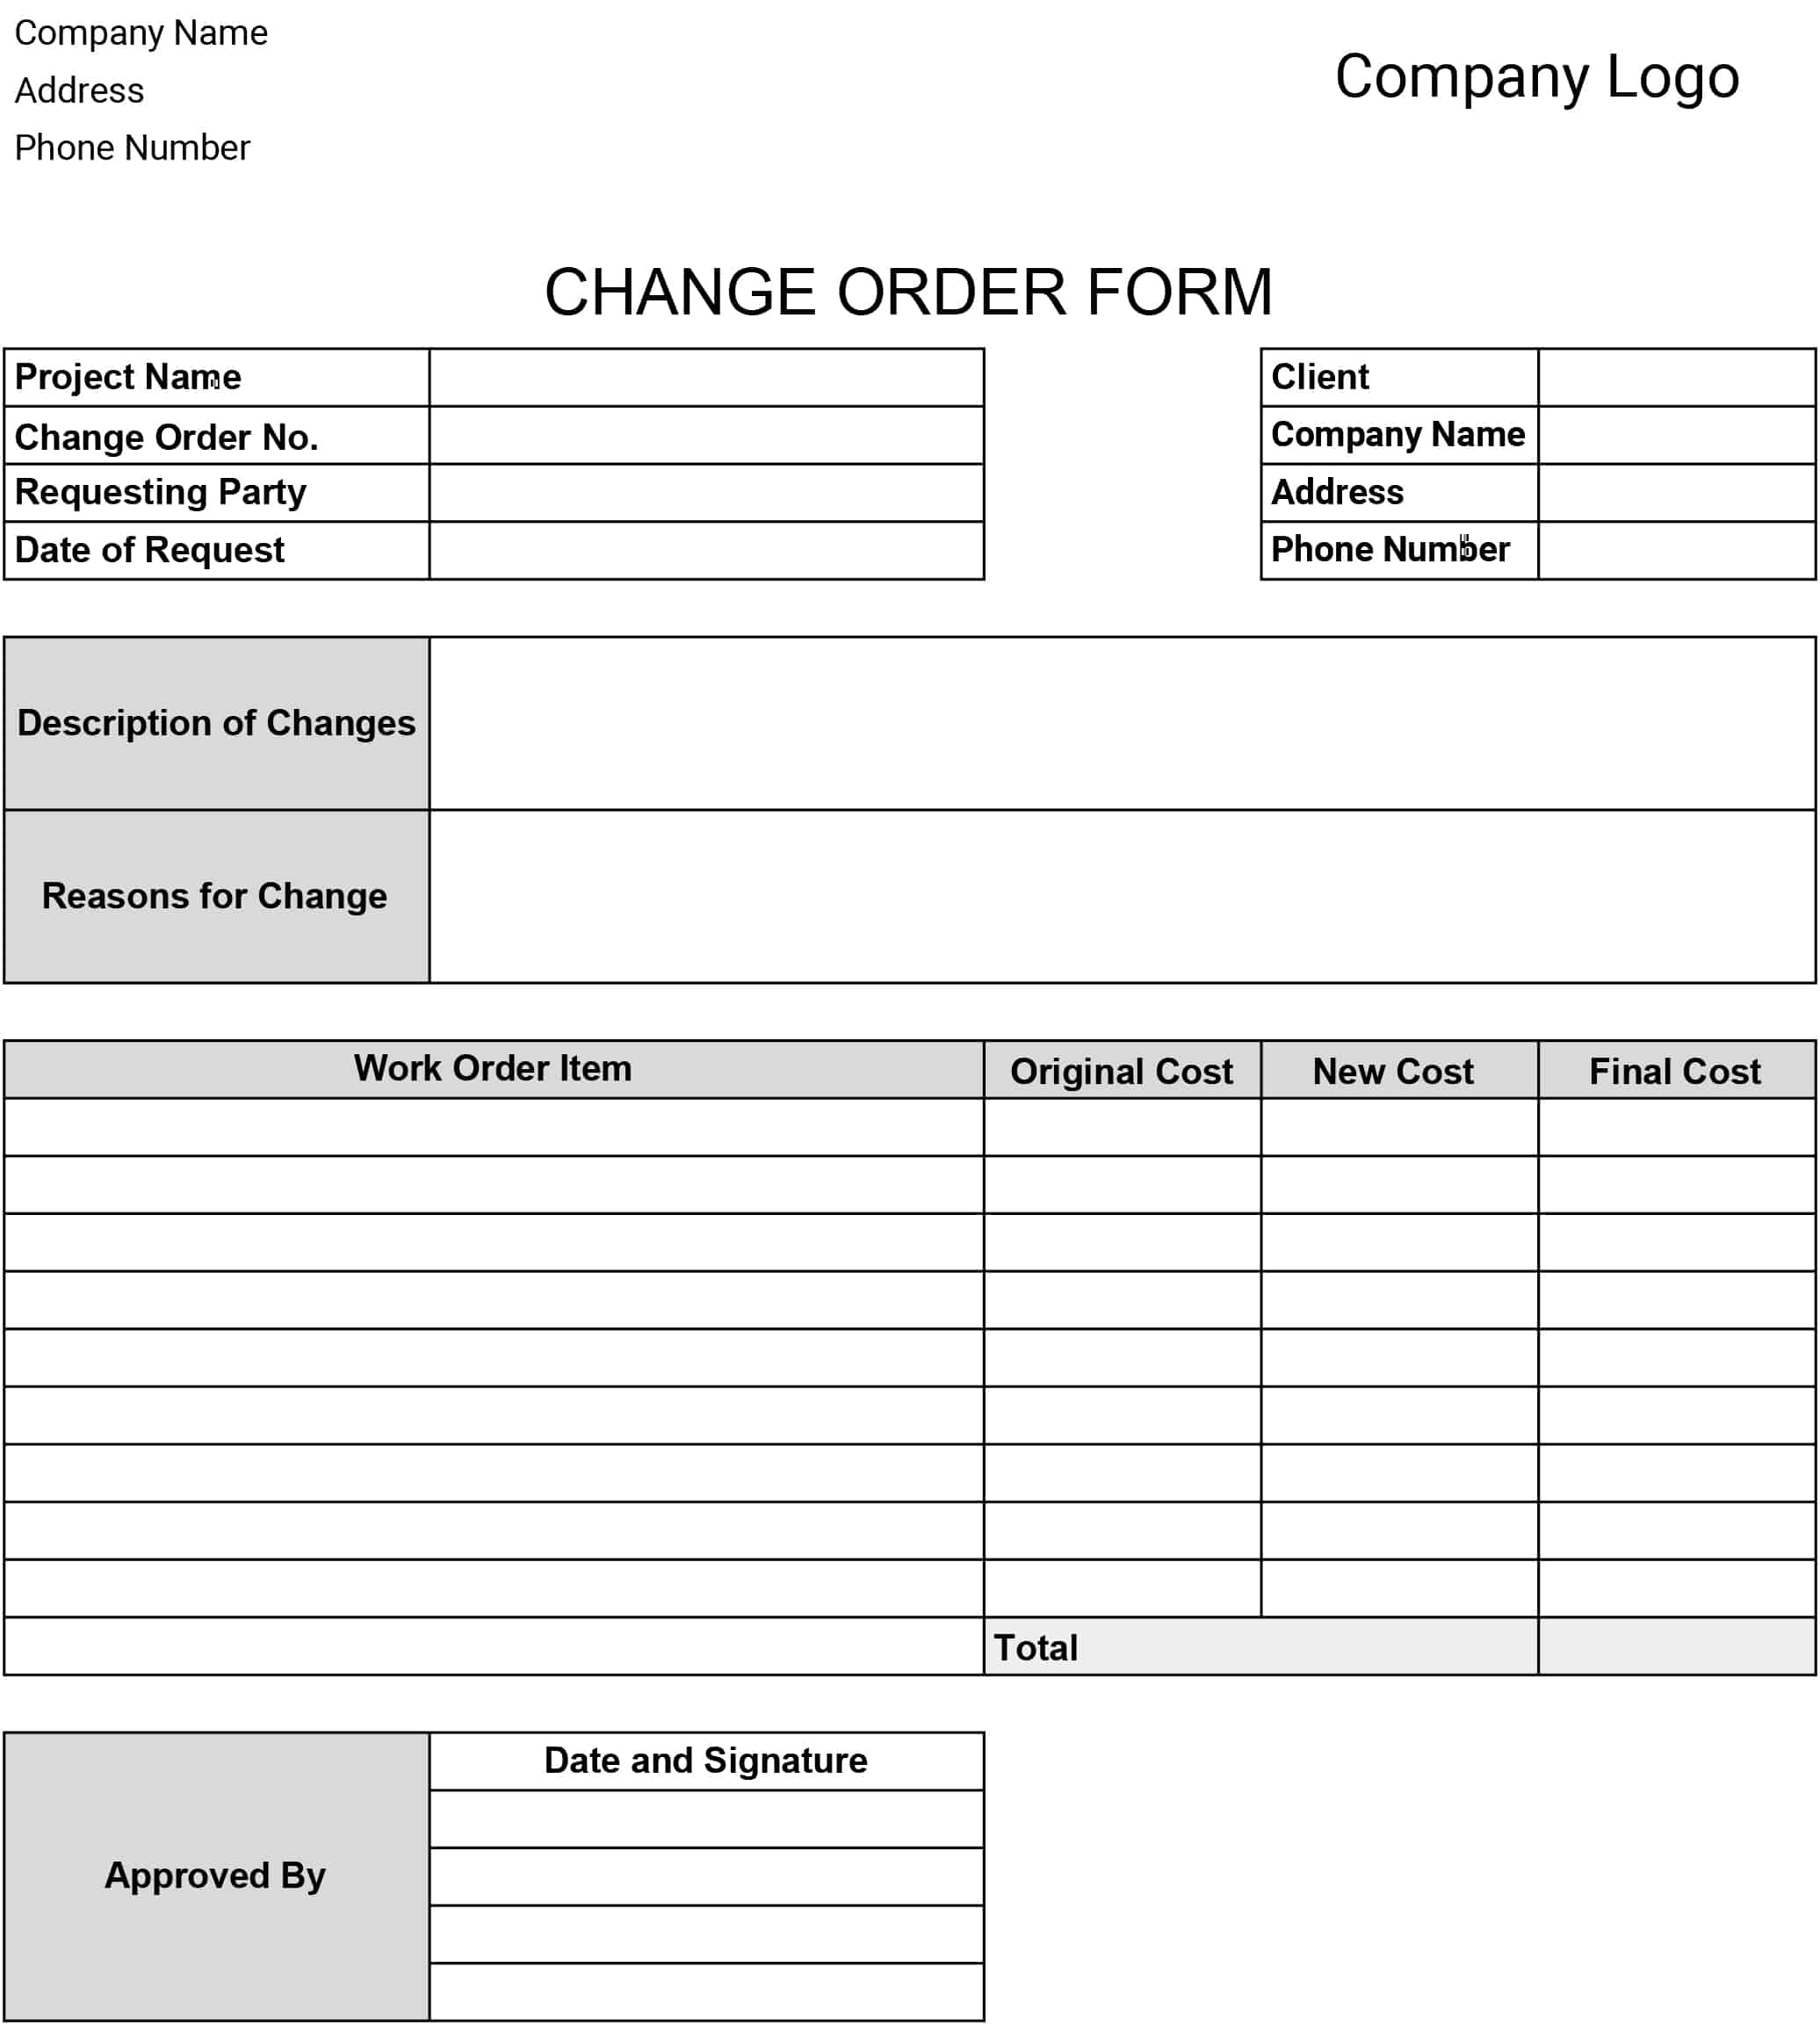 Change Order Templates: Download & Print for Free!